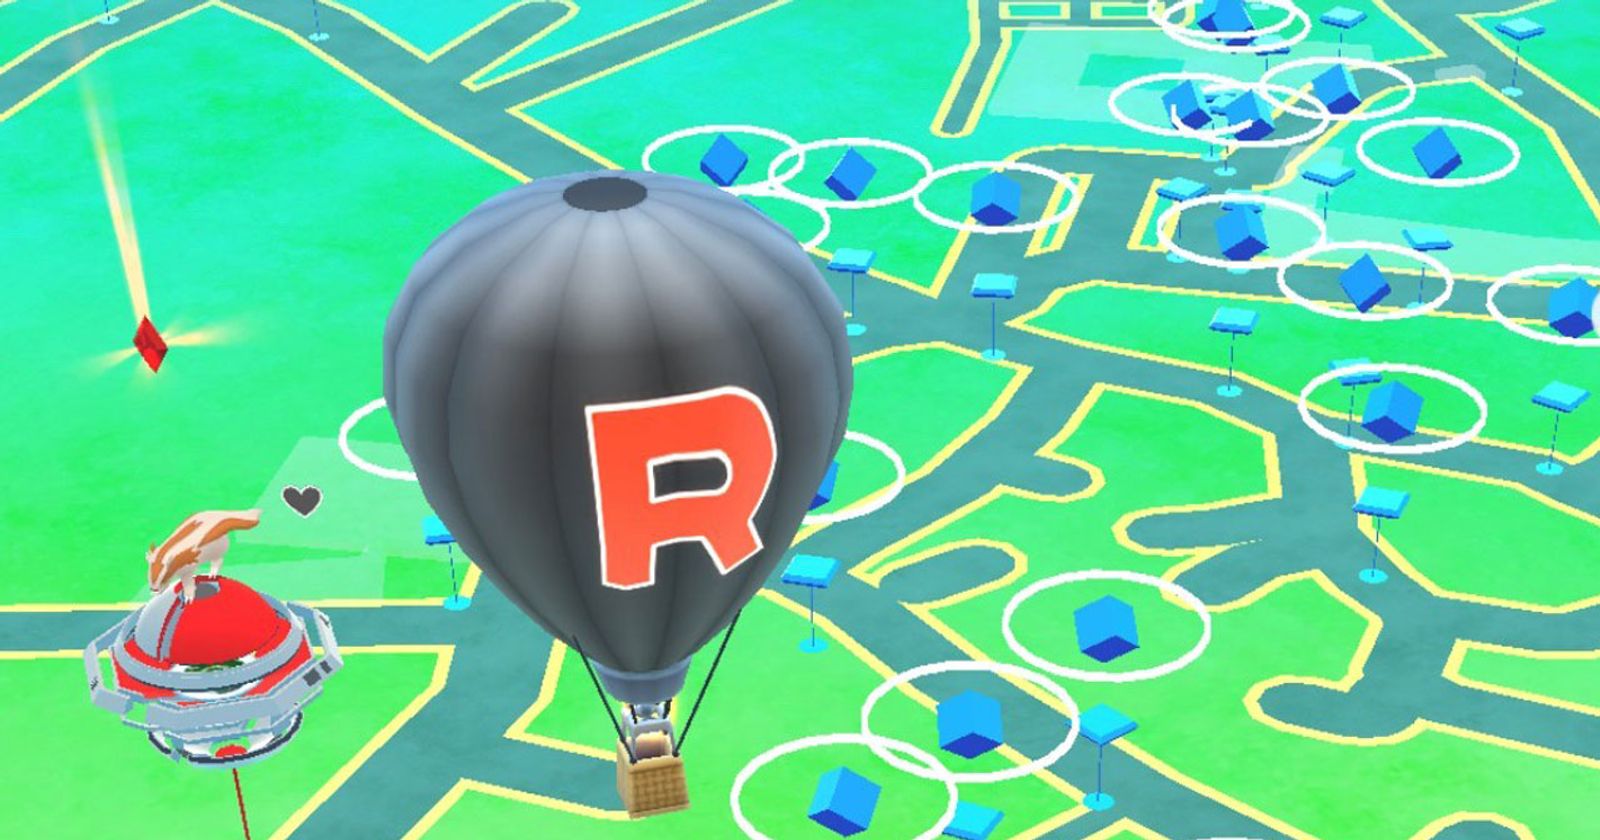 Pokémon GO on X: Anyone can be a hero. Whether it's helping someone cross  the street or saving Shadow Pokémon from Team GO Rocket, you have the power  to make a difference!